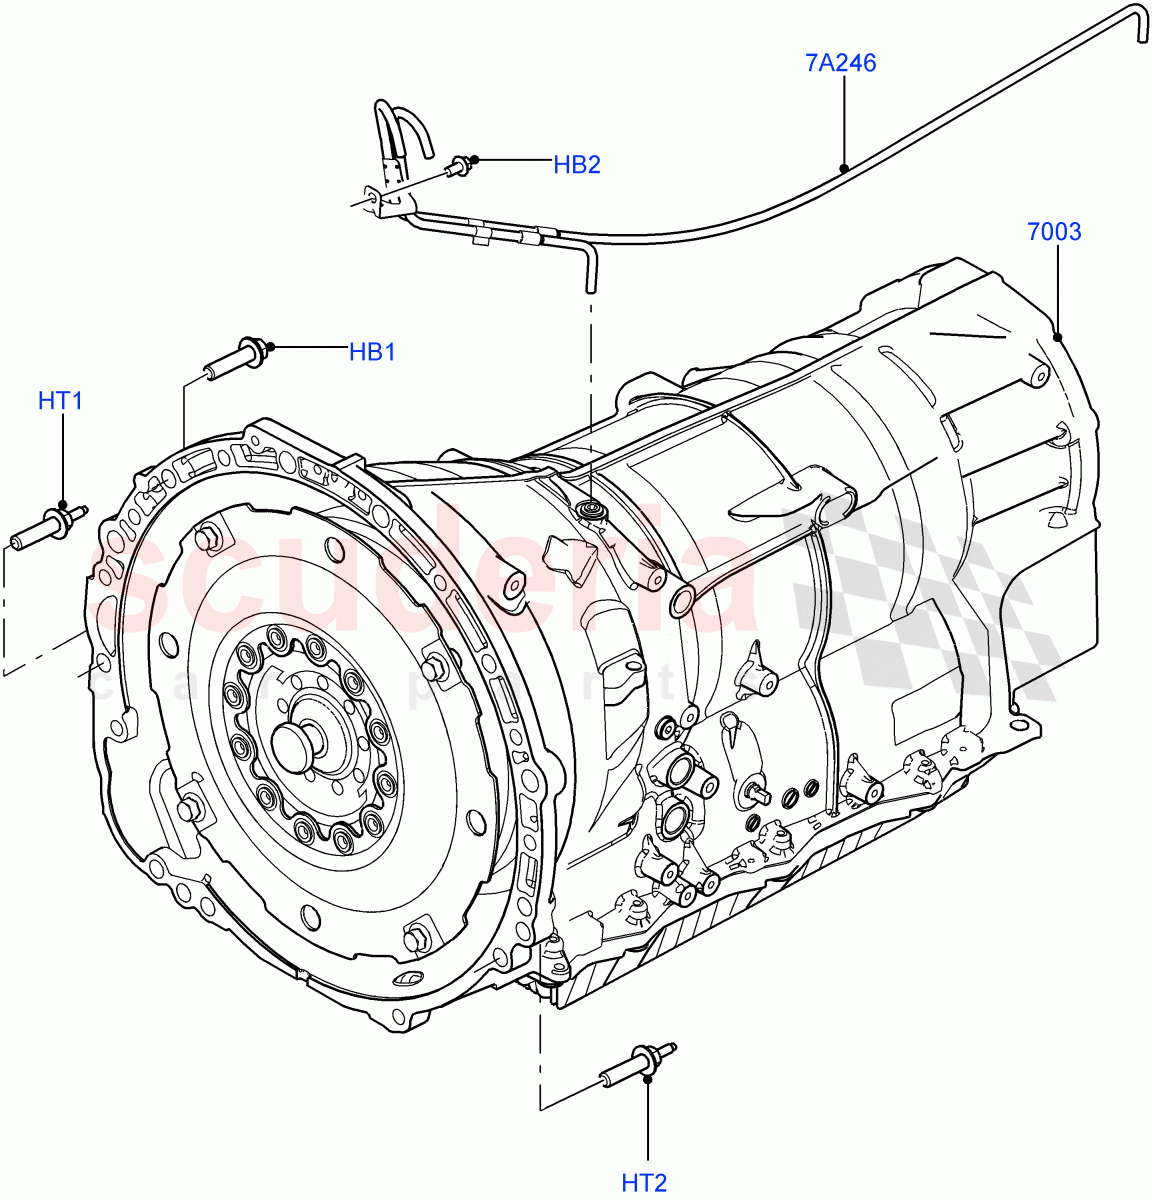 Auto Trans Assy & Speedometer Drive(Nitra Plant Build)(4.4L DOHC DITC V8 Diesel,8 Speed Auto Trans ZF 8HP70 4WD,3.0 V6 Diesel)((V)FROMK2000001) of Land Rover Land Rover Discovery 5 (2017+) [2.0 Turbo Diesel]